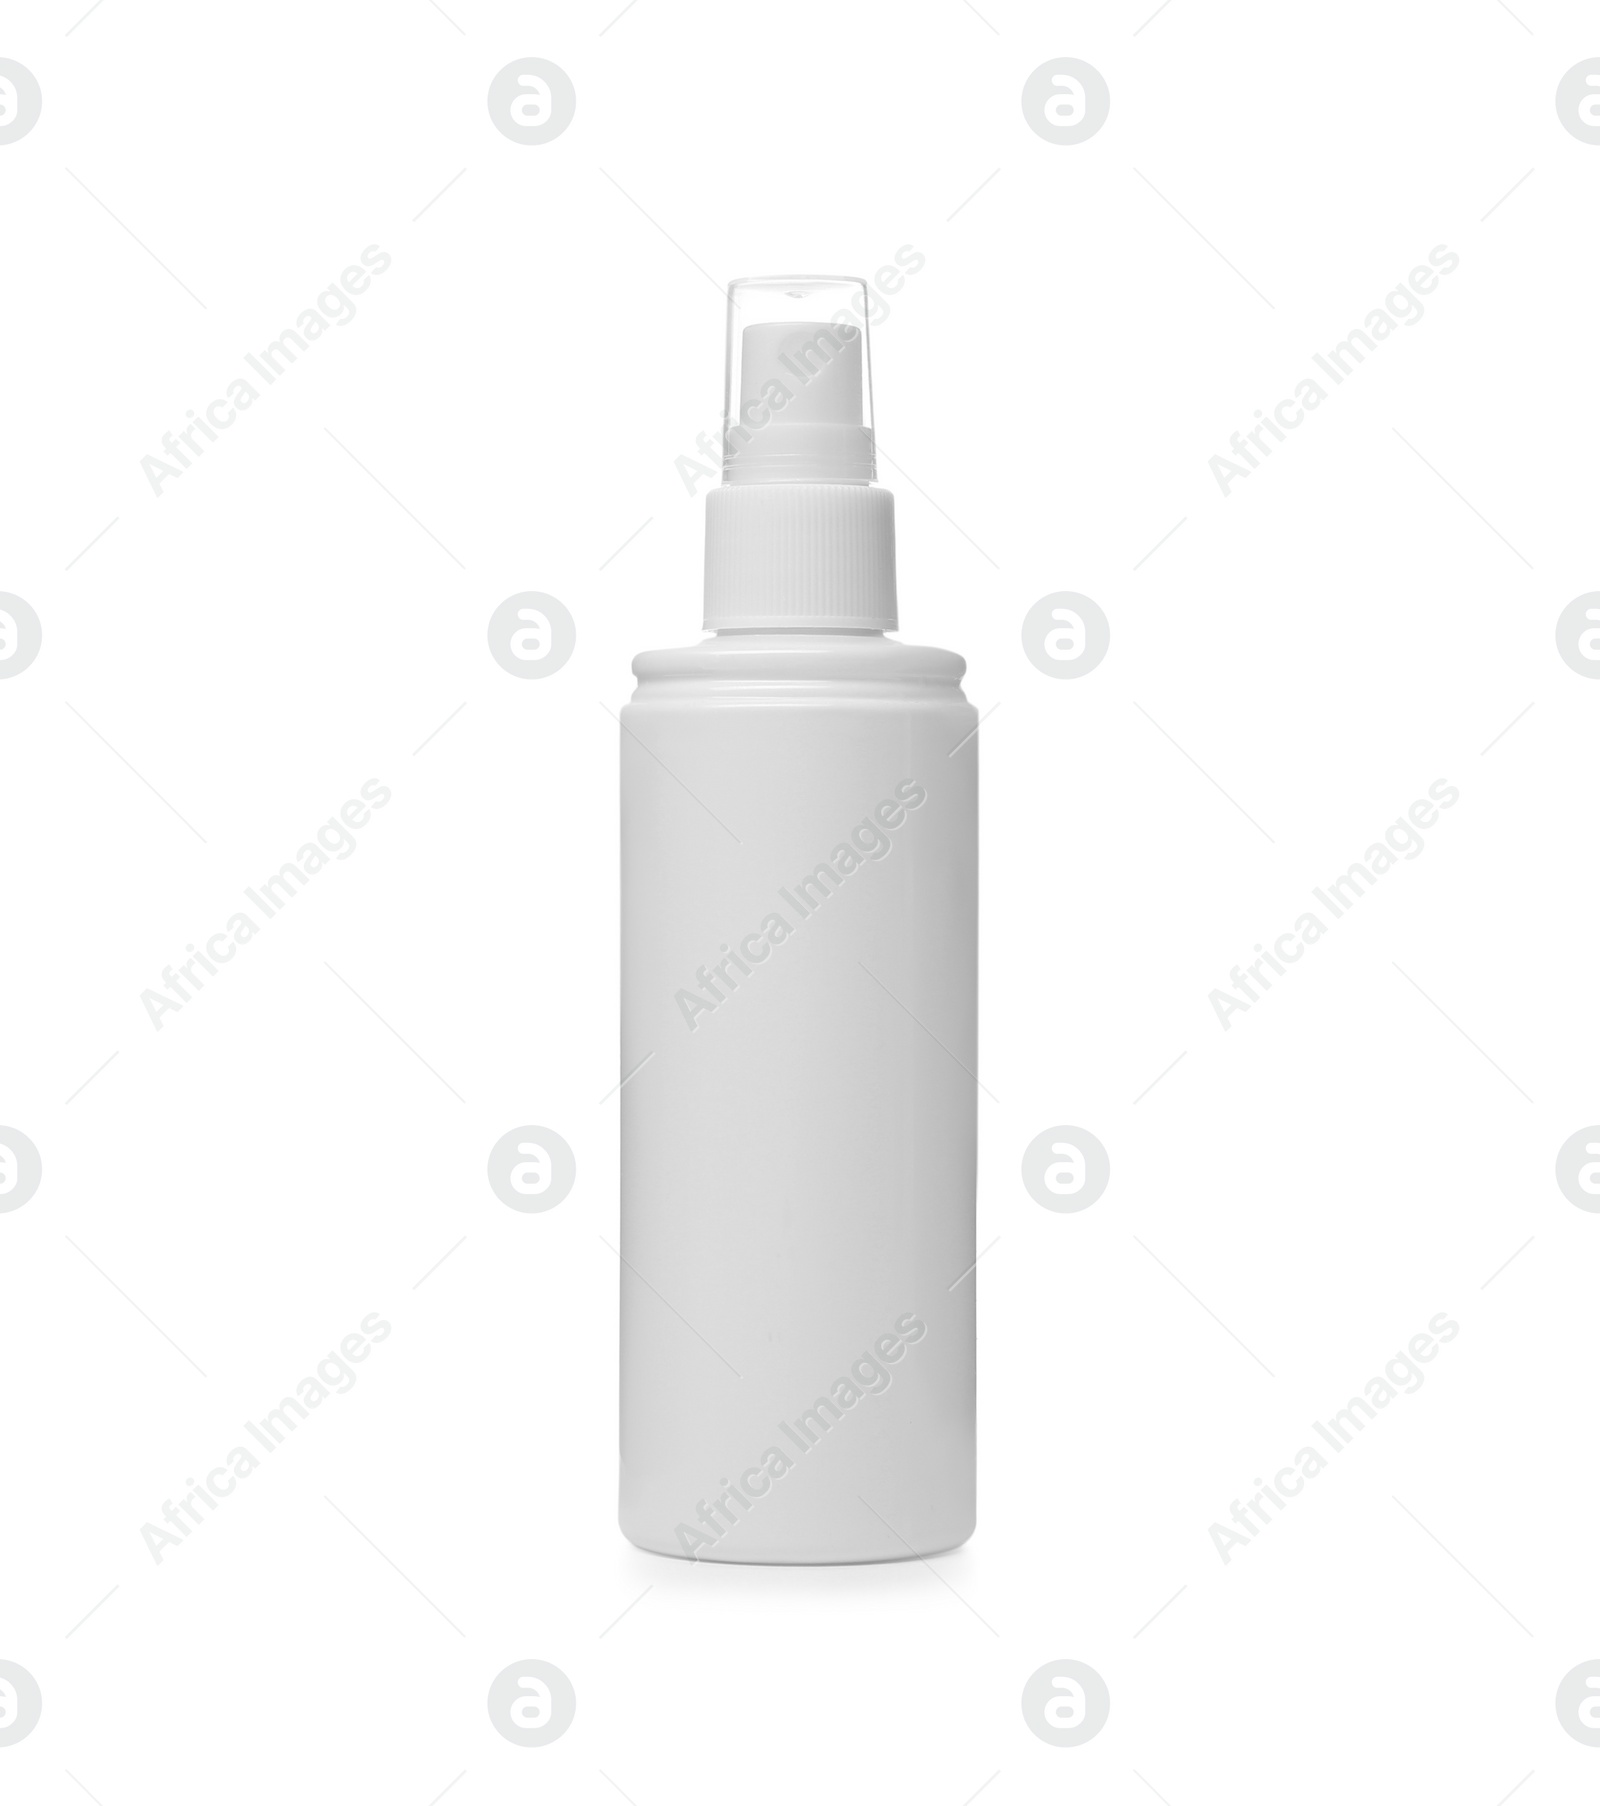 Photo of Bottle of insect repellent spray isolated on white